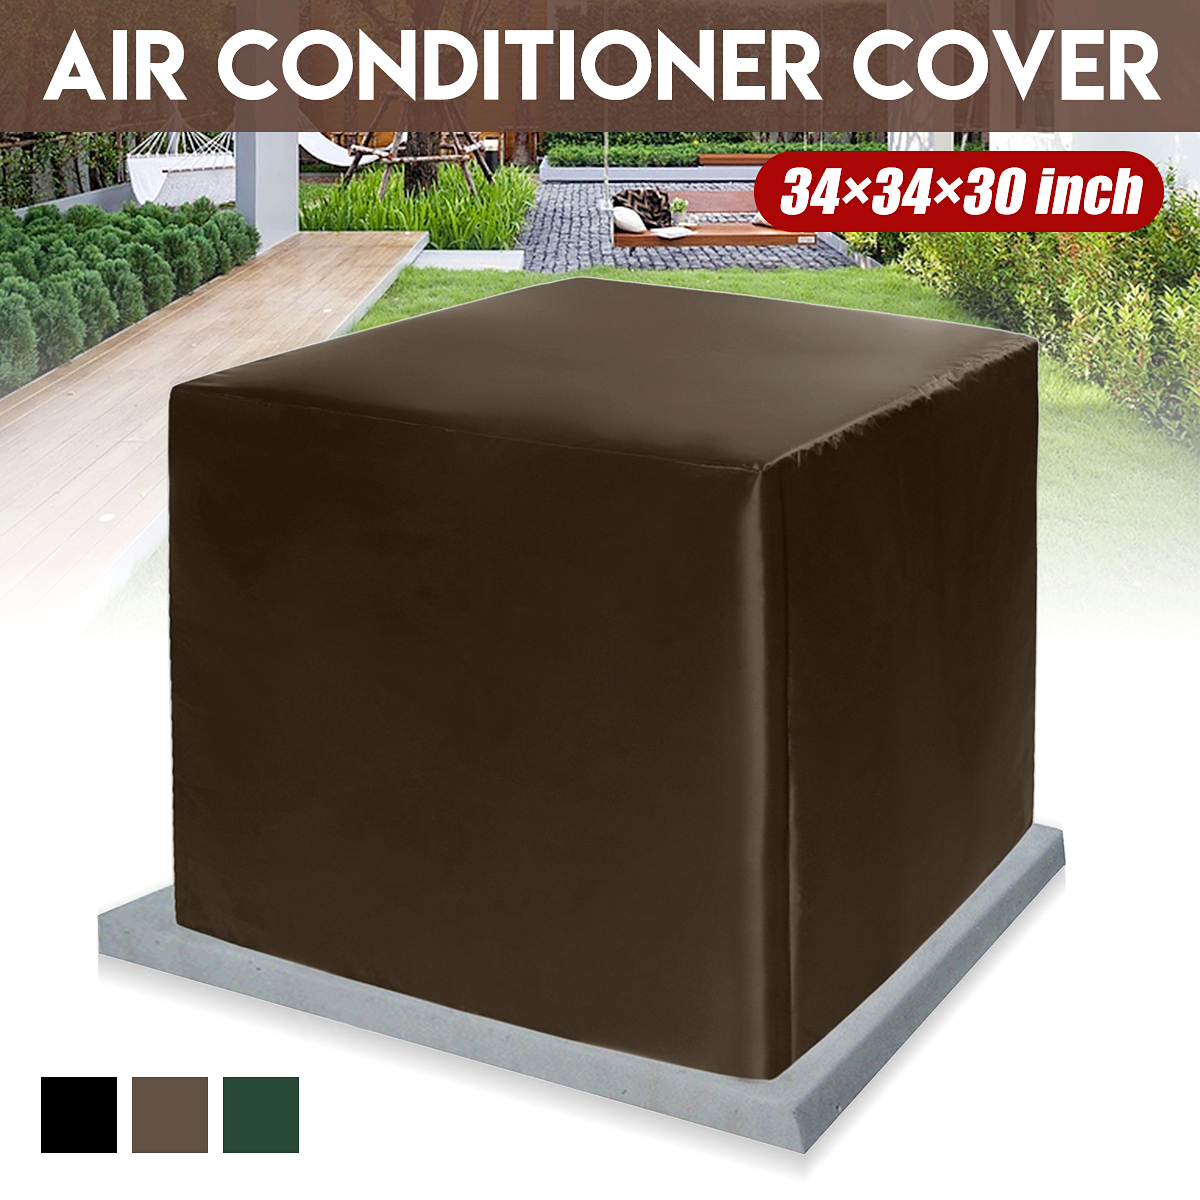 34times34times30-Inch-Air-Conditioner-Cover-Furniture-Waterproof-Windproof-Tool-Storage-1571365-1